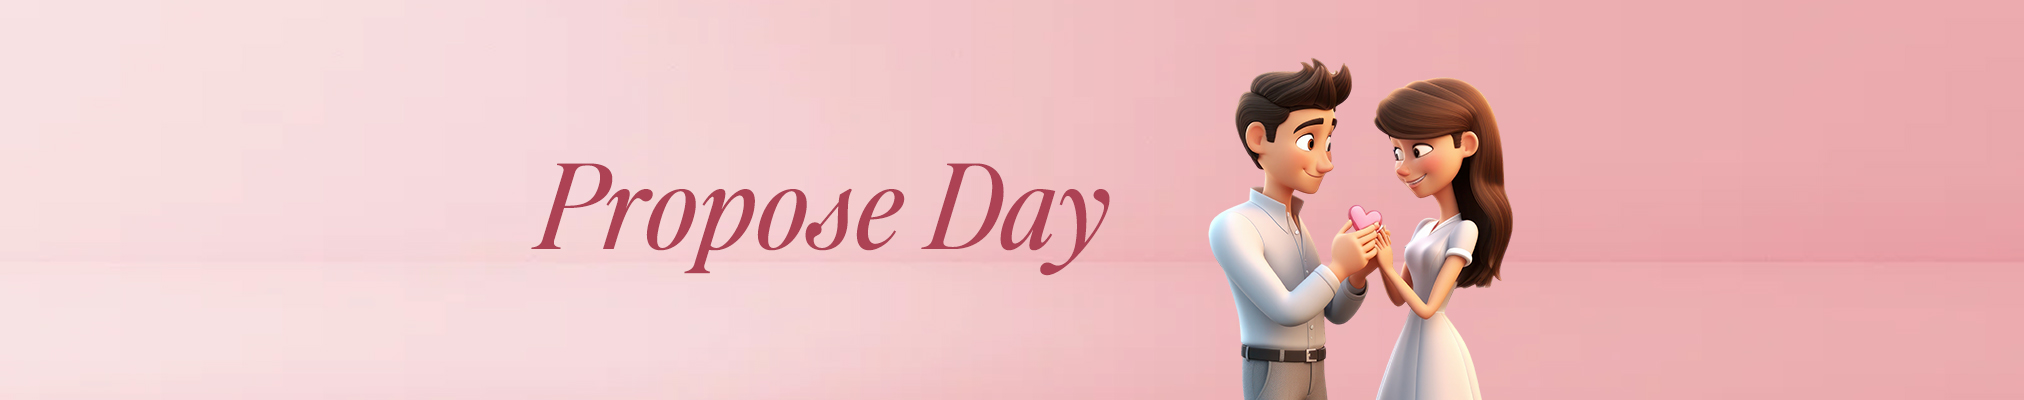 Propose Day Banner